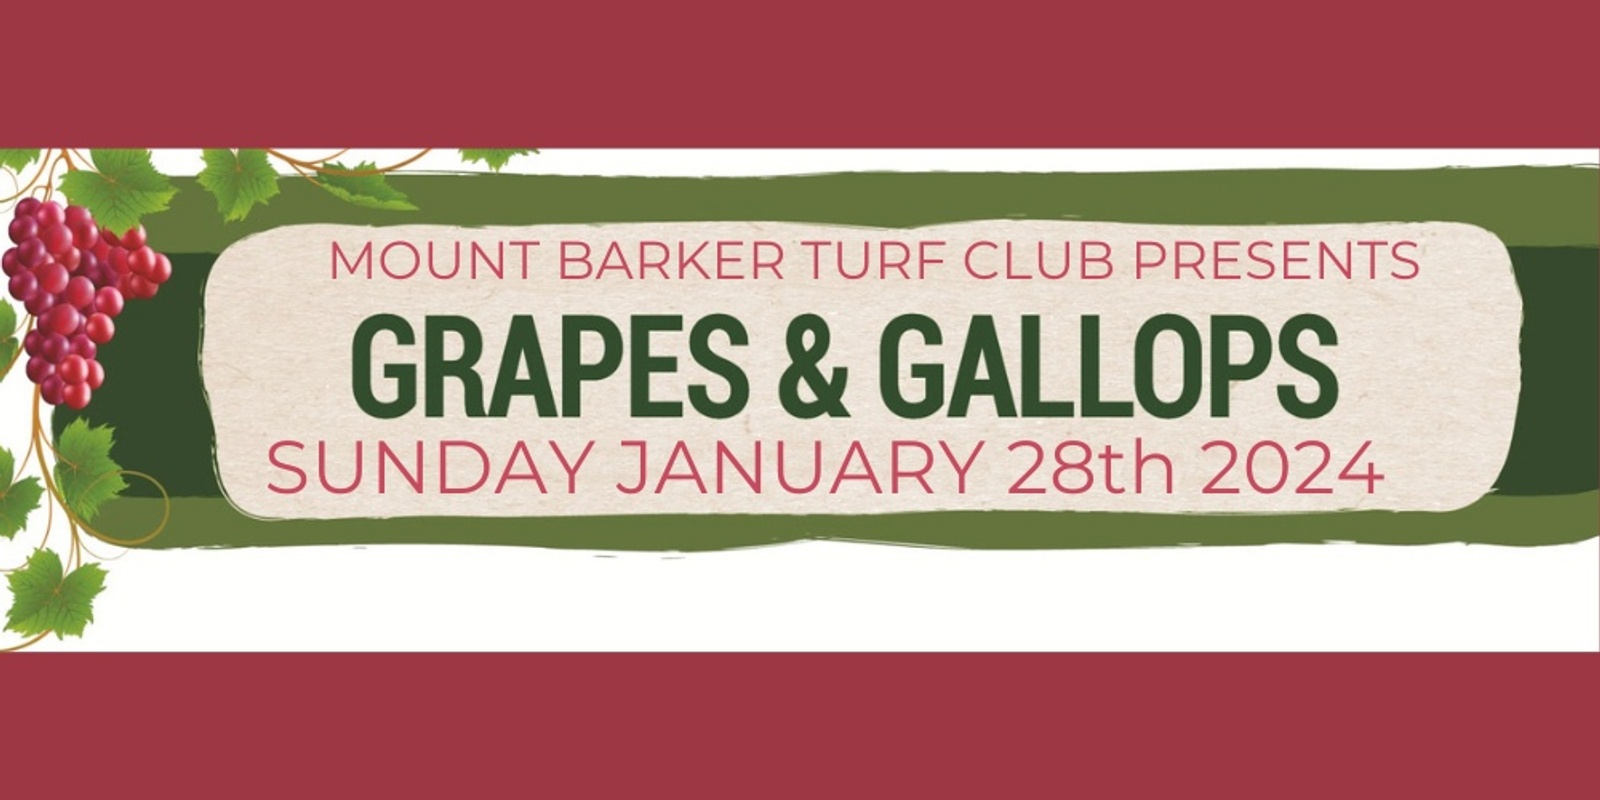 Banner image for Mount Barker Turf Club Grapes & Gallops 2024